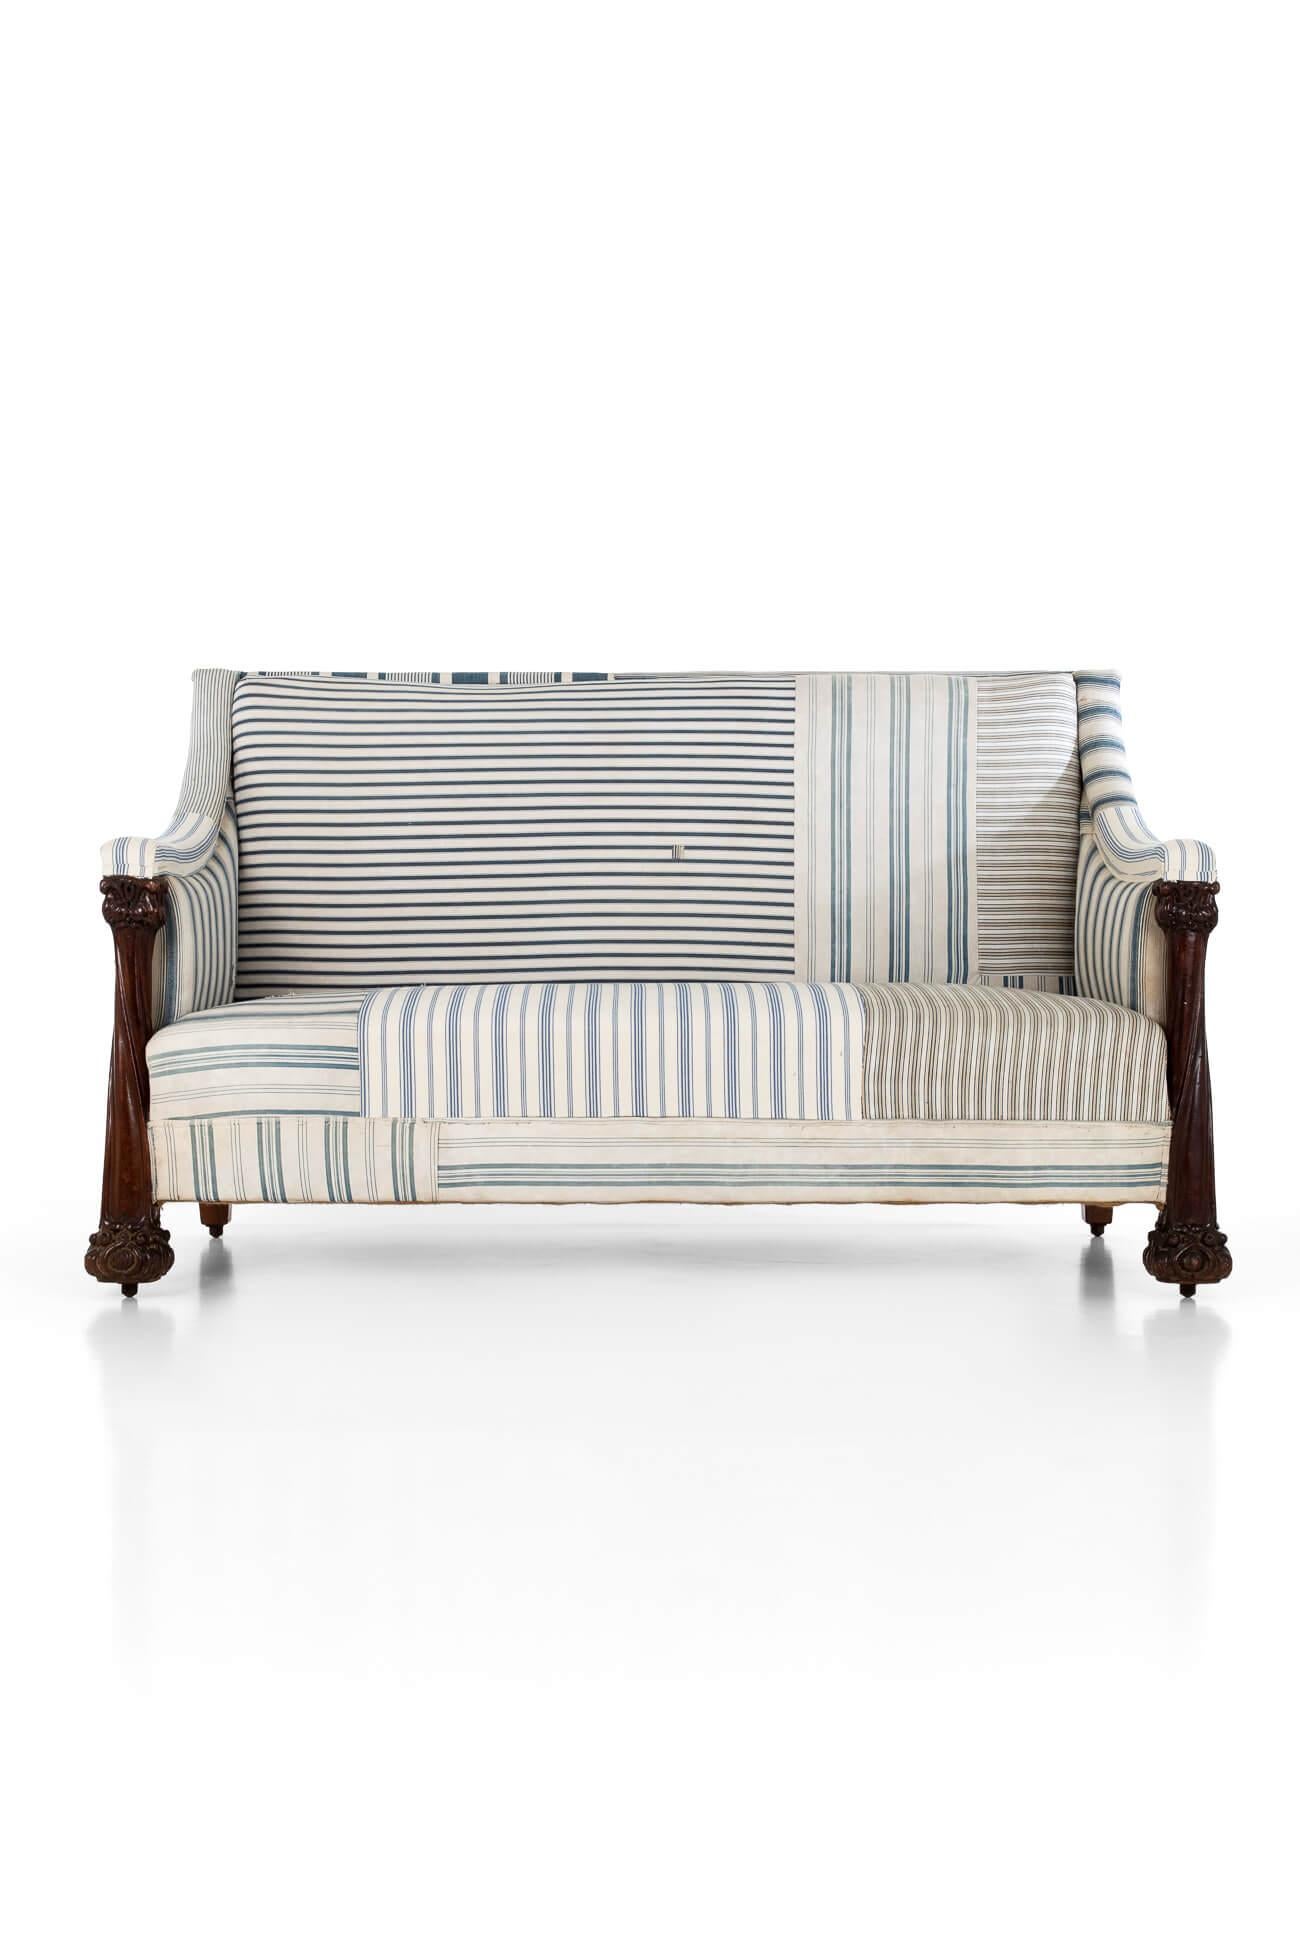 A wonderful and unique Arts and Crafts sofa in original blue stripe ticking upholstery.

With a generous straight back, accompanied by gently scrolled padded arms that lead to two large carved mahogany pillar arm supports.

Beautifully carved